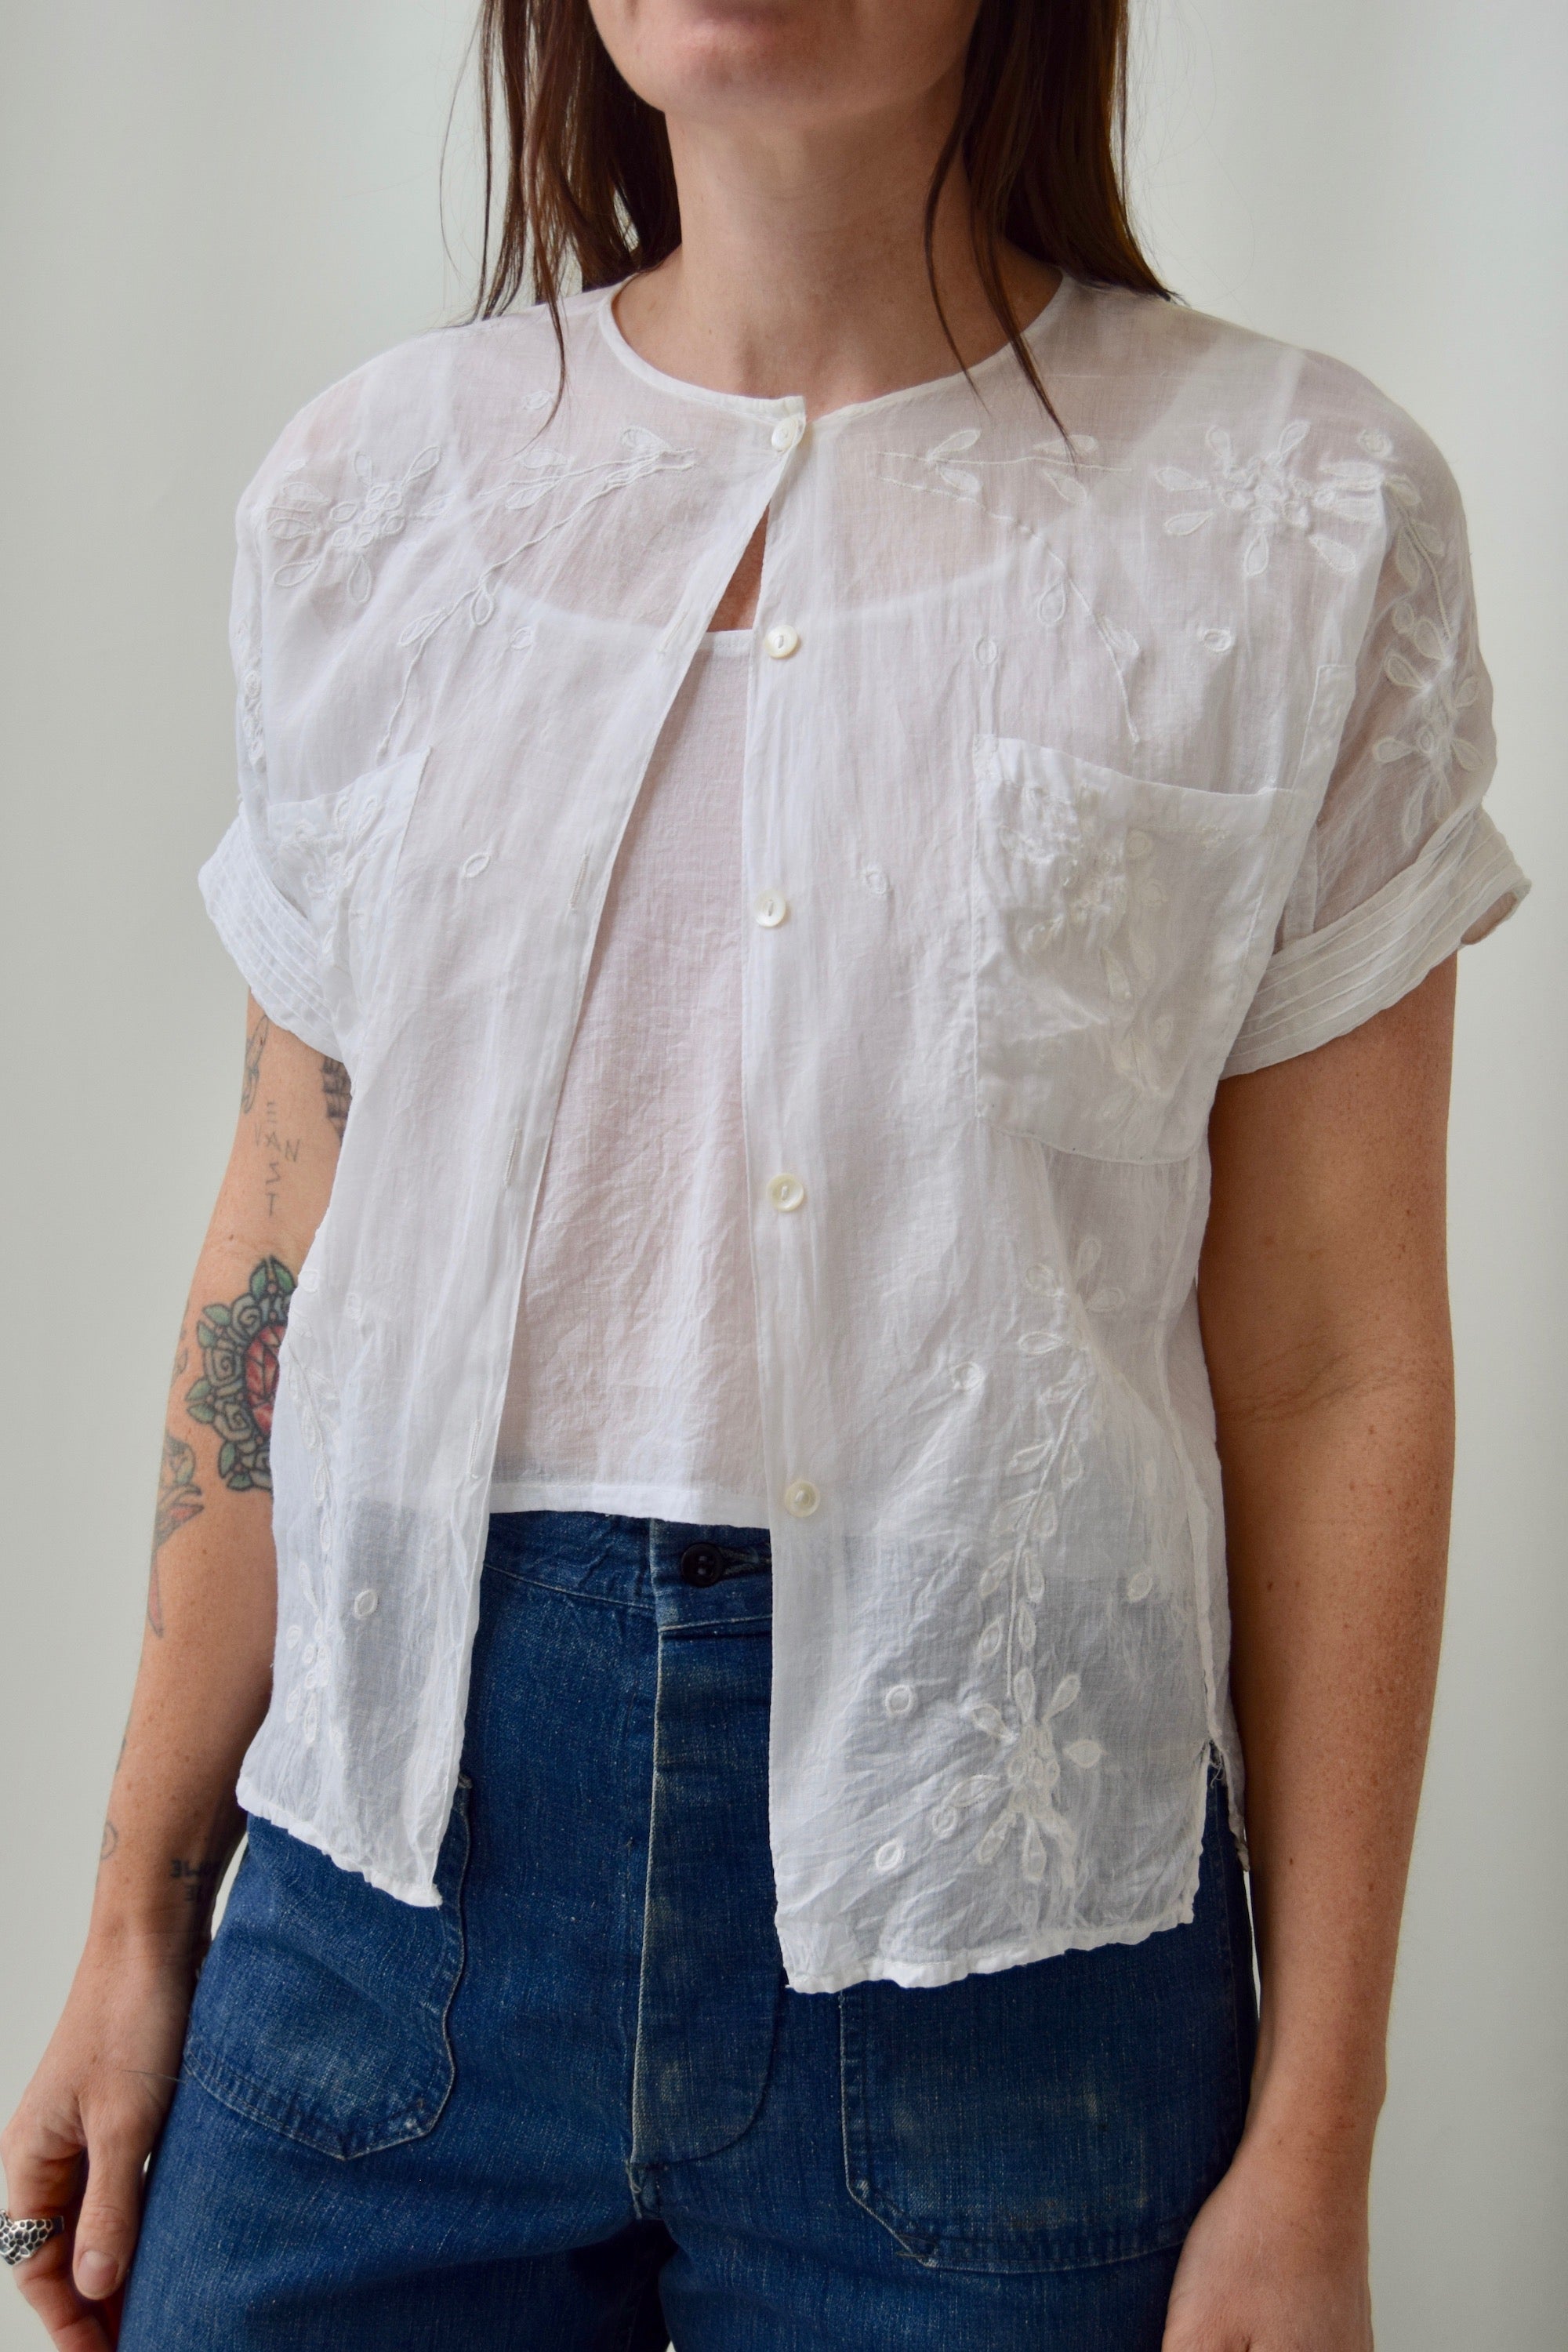 Indian Cotton "Regarde" Sheer Embroidered Blouse